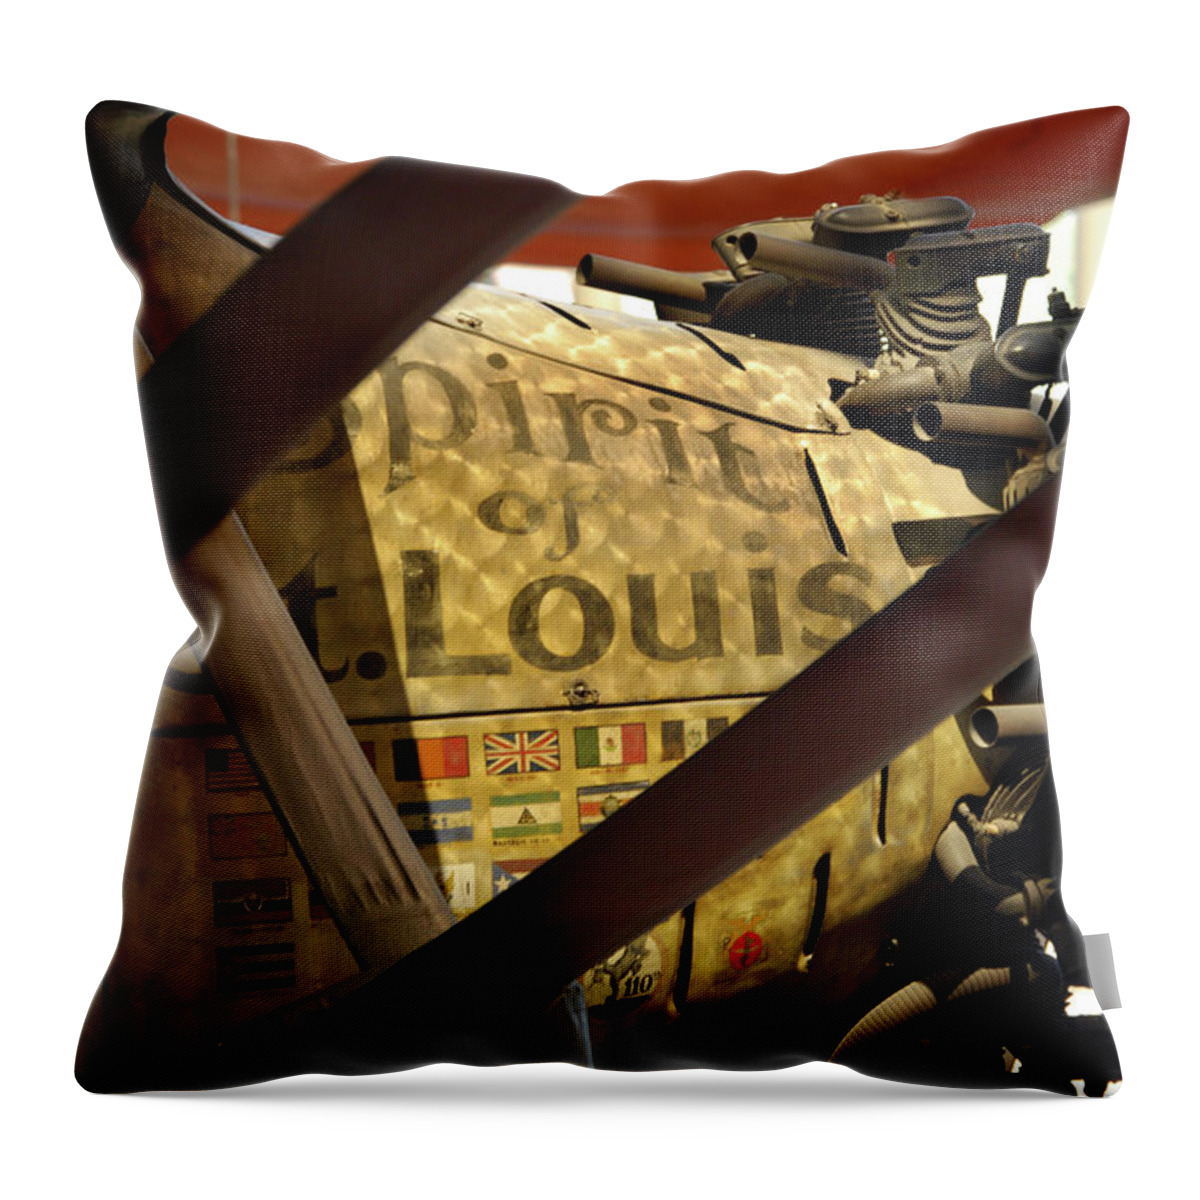 Spirit Of St. Louis Throw Pillow featuring the photograph Spirit Of St Louis At Smithsonian by Skip Willits